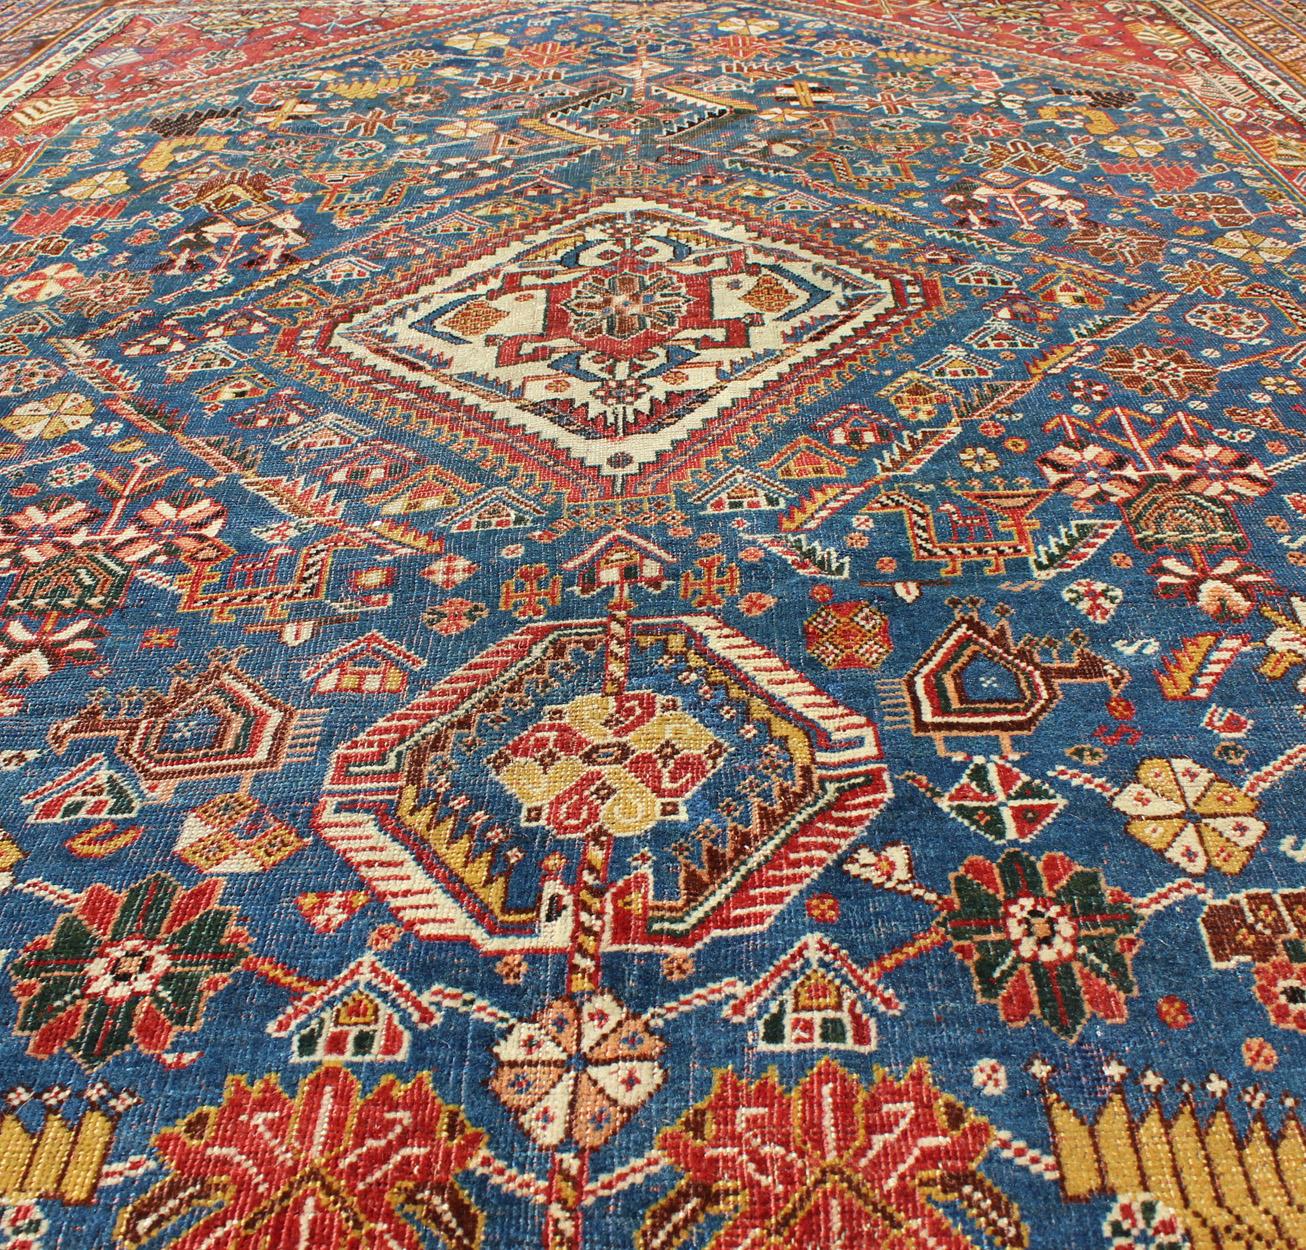 Wool Antique Persian Qashqai Rug with Medallion Design in Rich Colors, Blue and Red